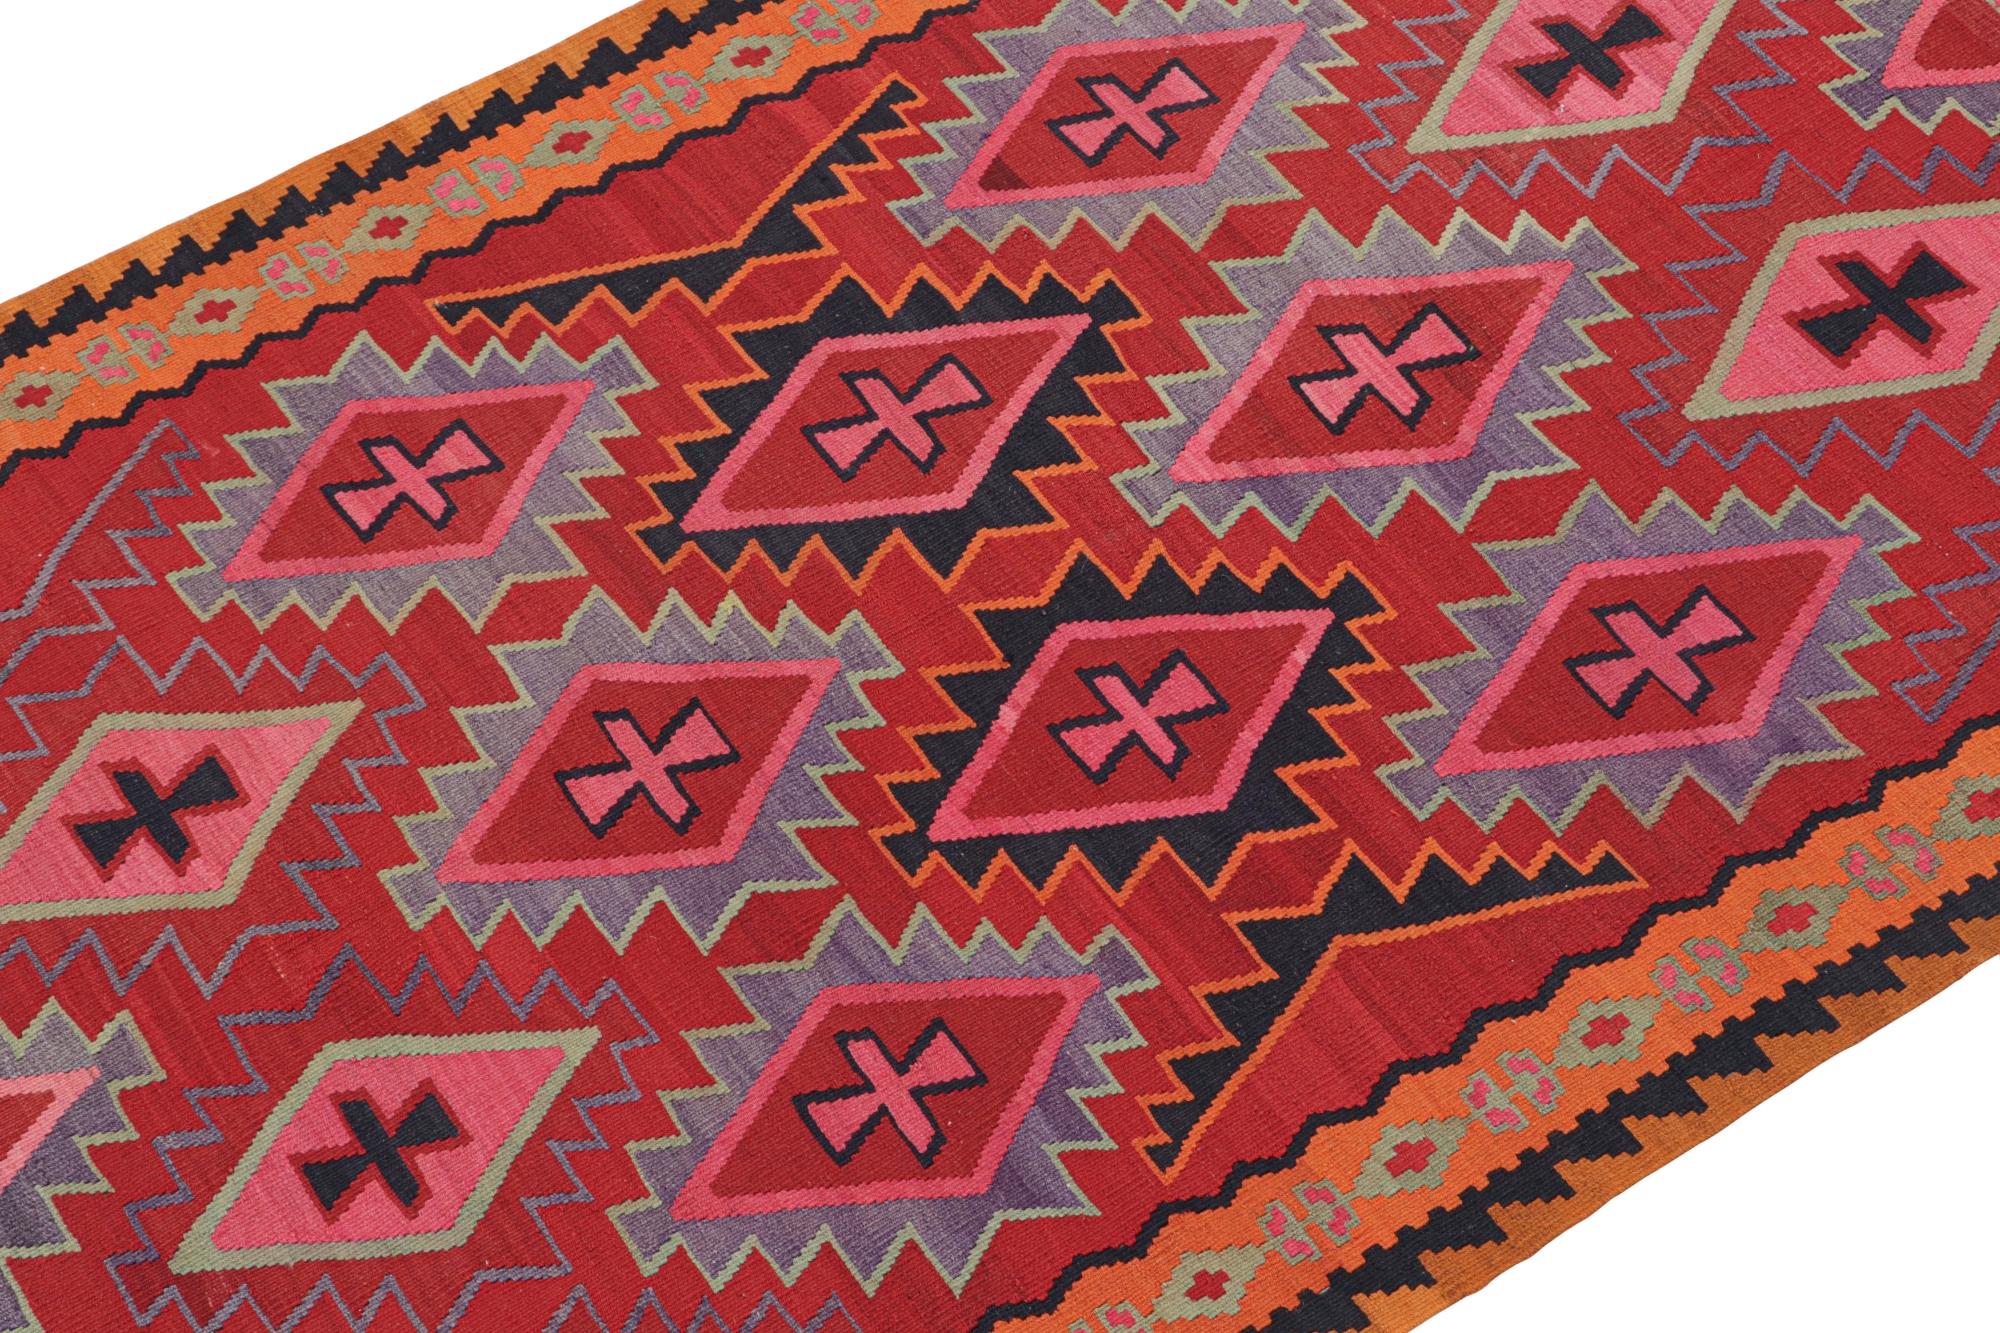 This vintage 5x11 Persian Kilim is a tribal rug from Meshkin—a small northwestern village known for its fabulous works. Handwoven in wool, it originates circa 1950-1960.

On the Design:

The design enjoys vibrant medallions on a rich red field.